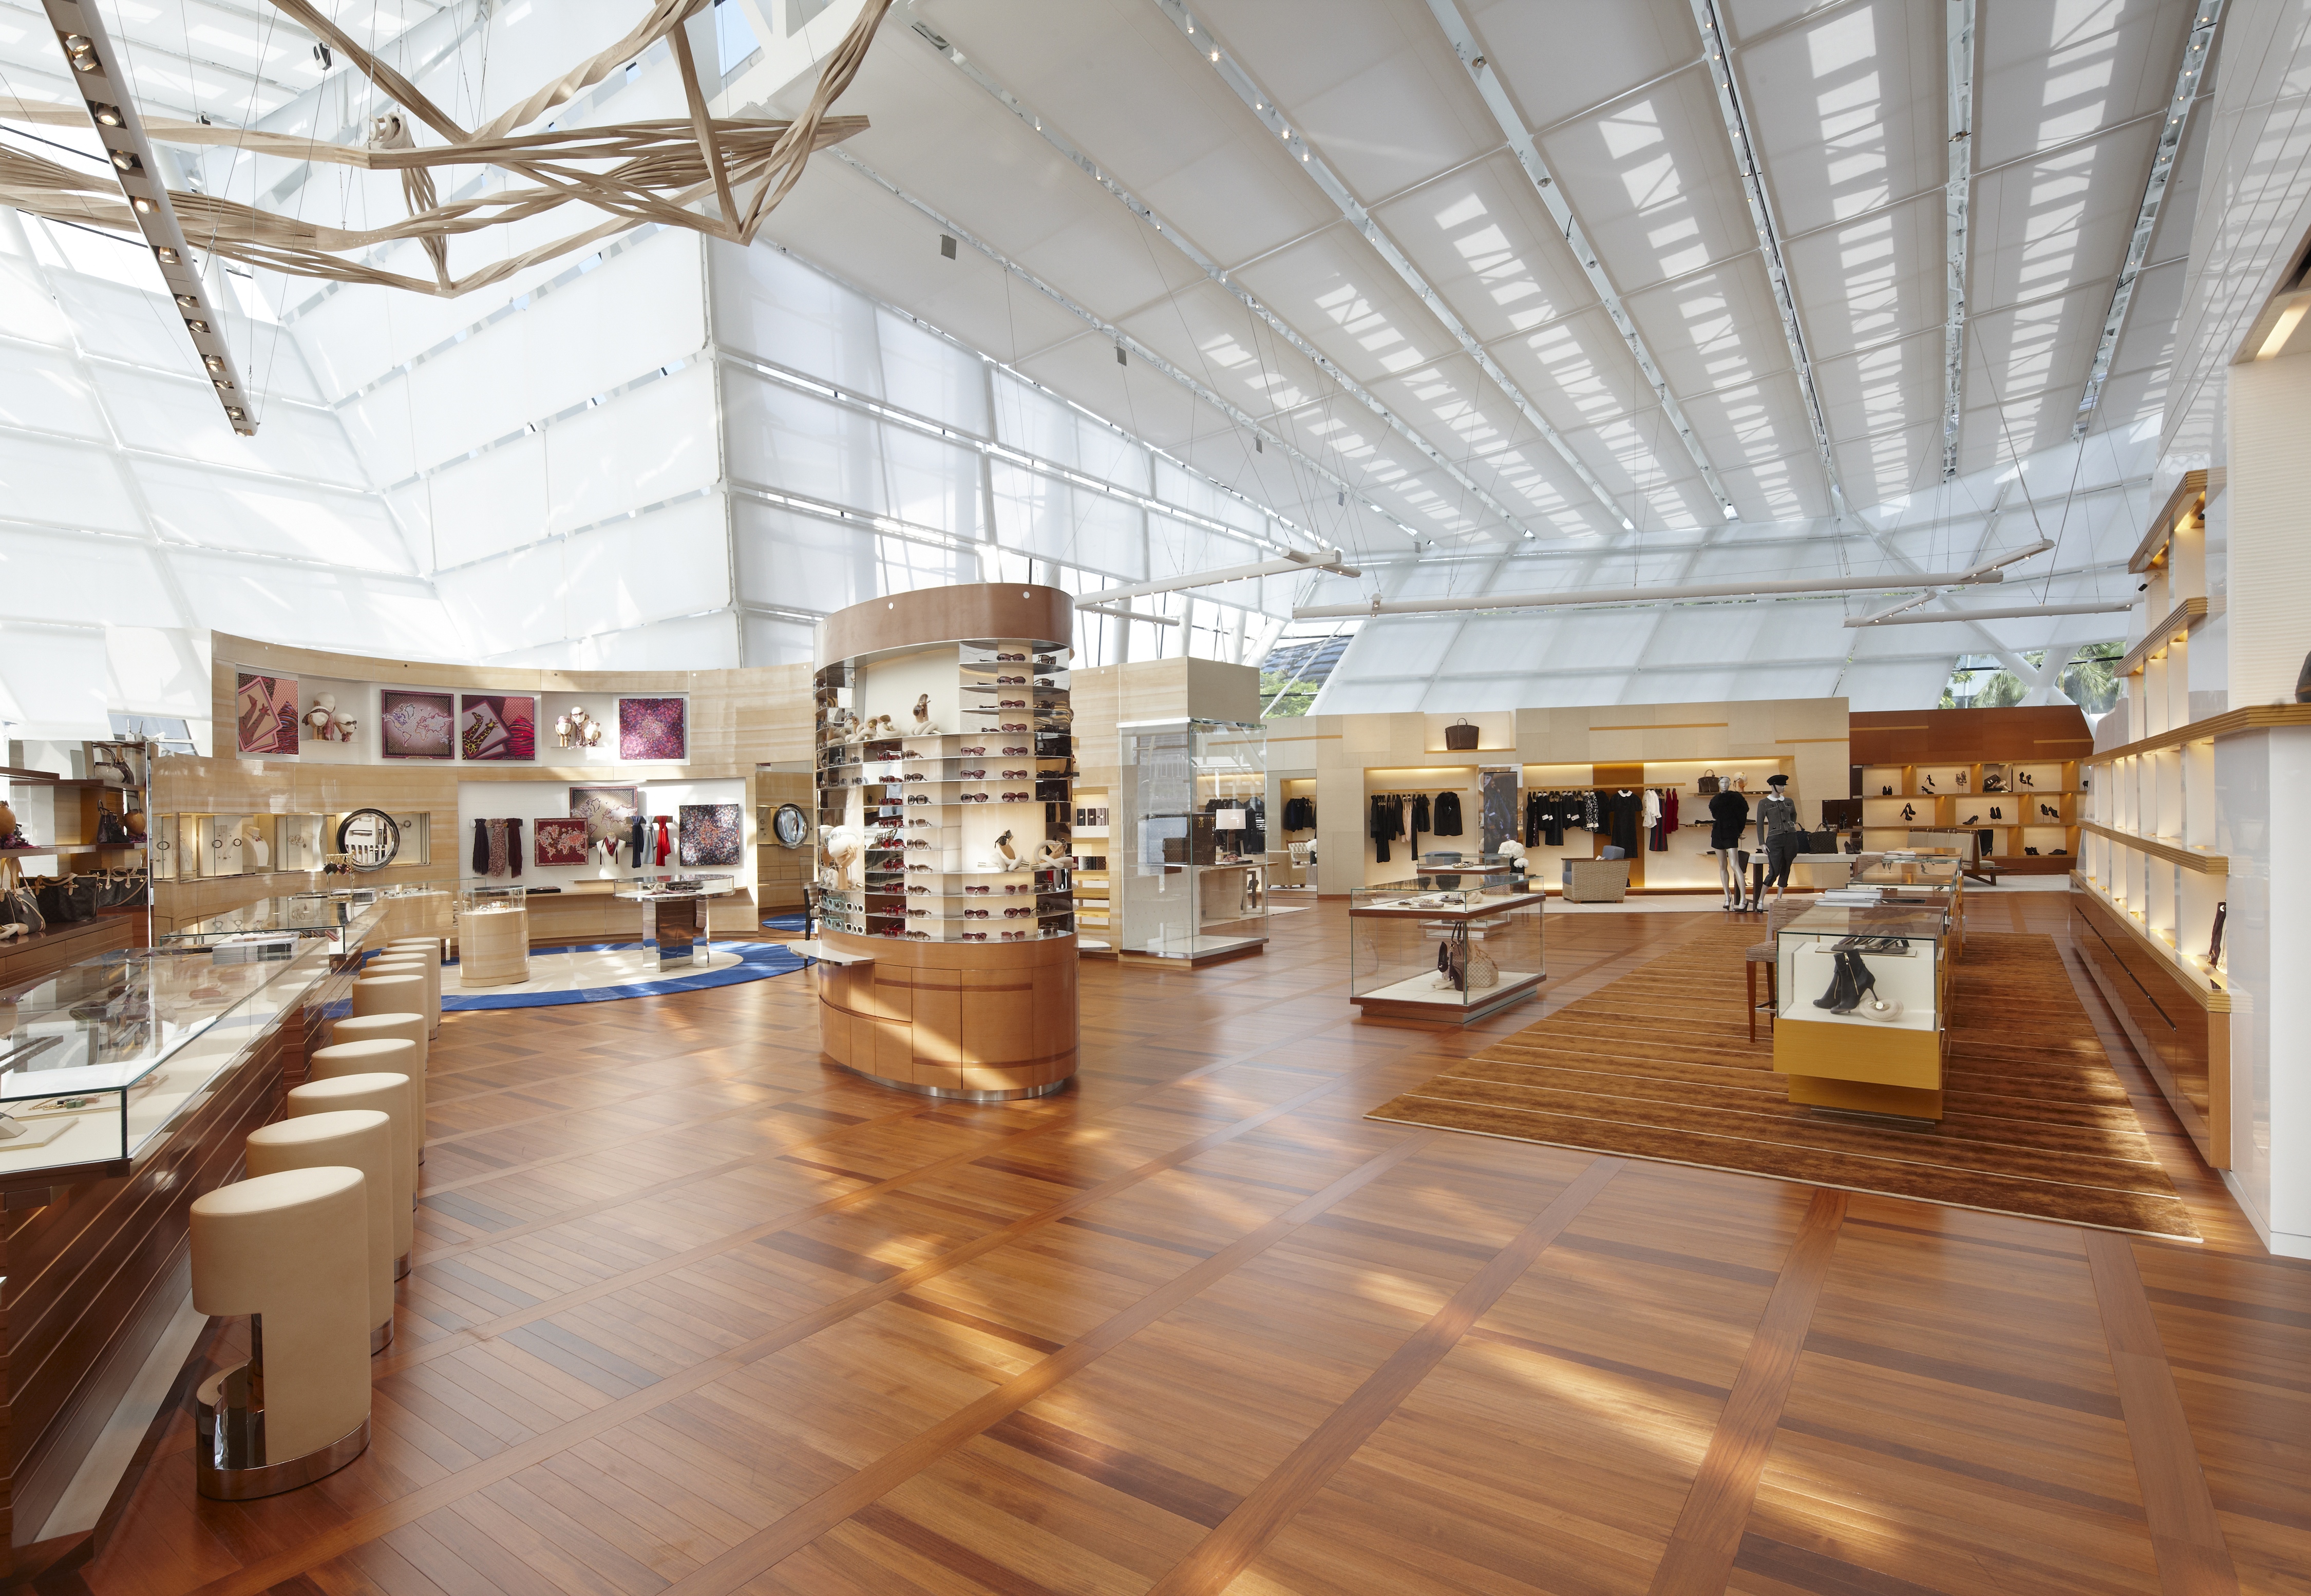 ArtScience Museum and the Louis Vuitton Island Maison at Marina